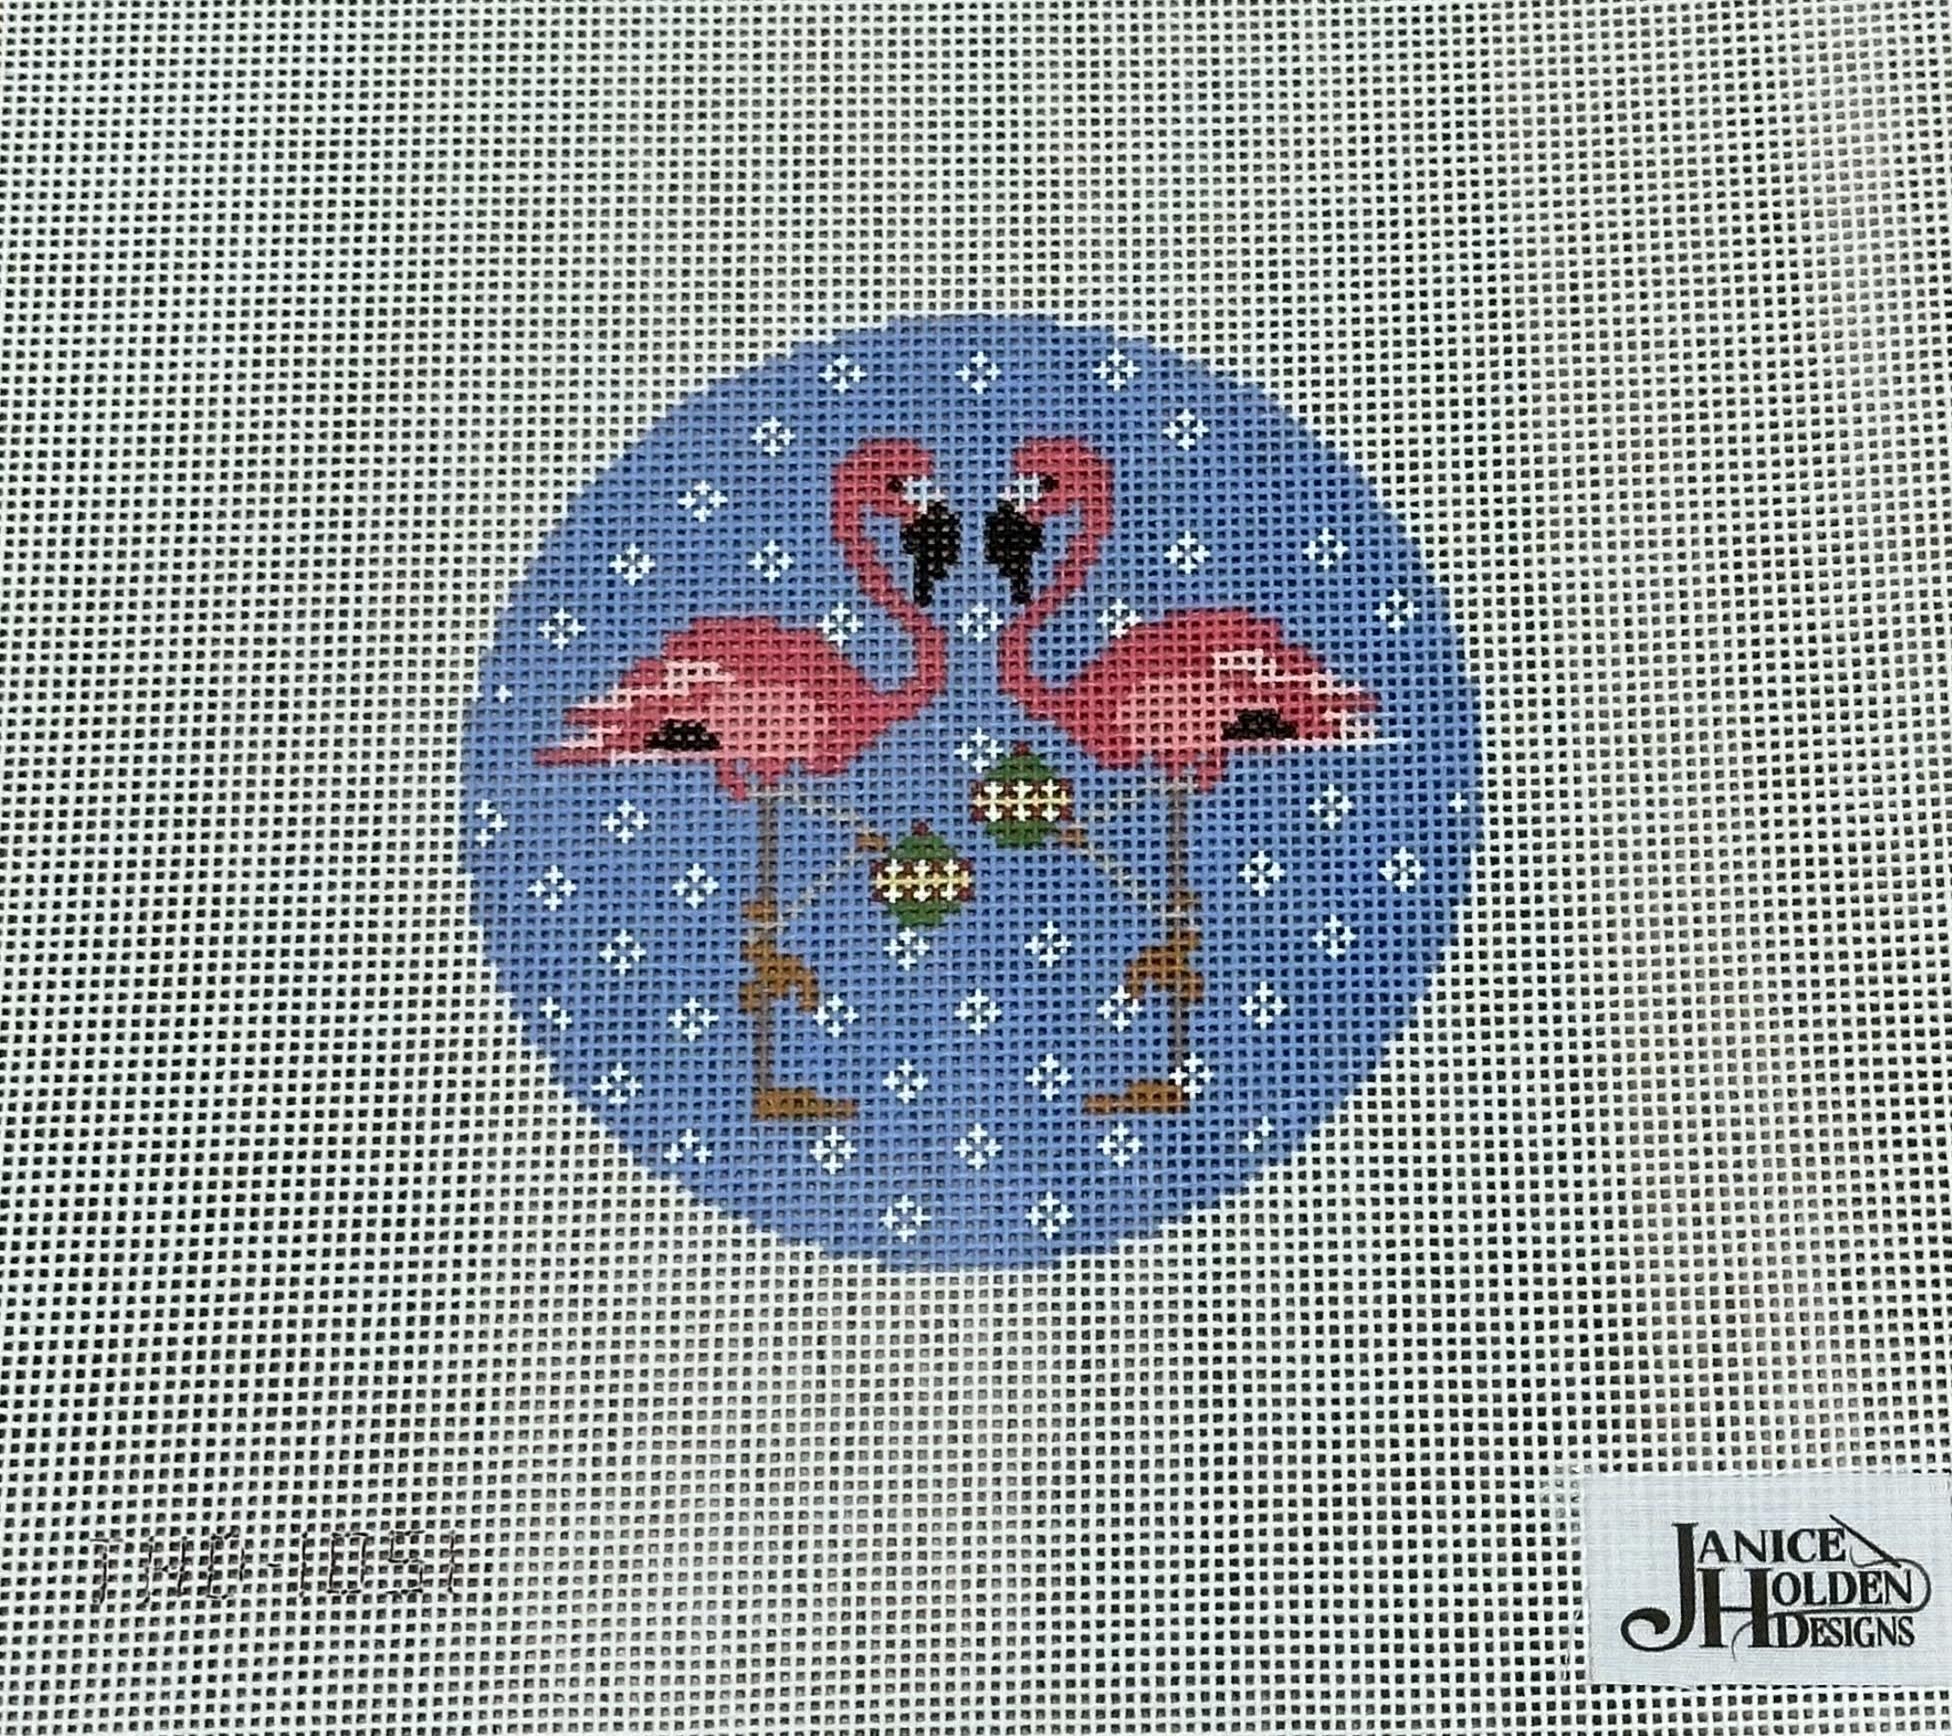 Janice Holden JHD-1051 Two Flamingos